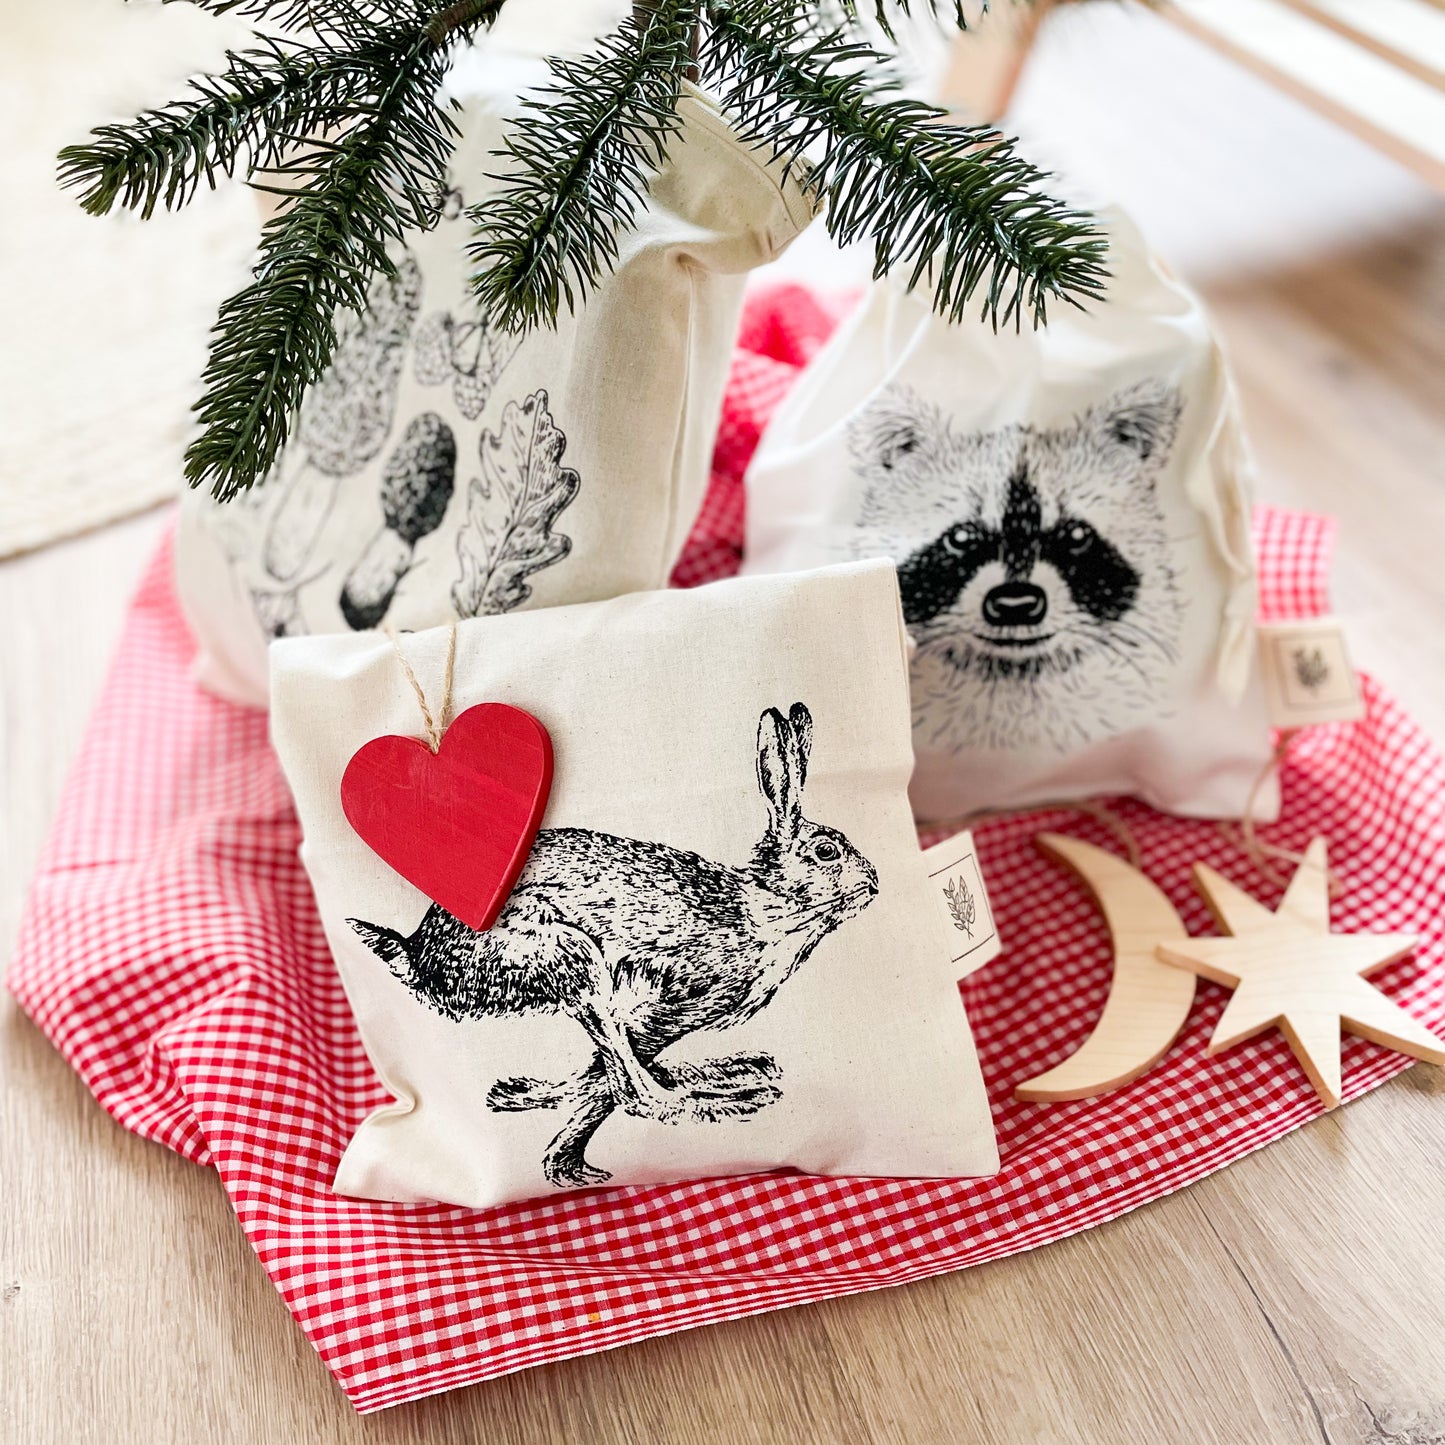 Small Cotton Produce/Gift Bag - Racoon